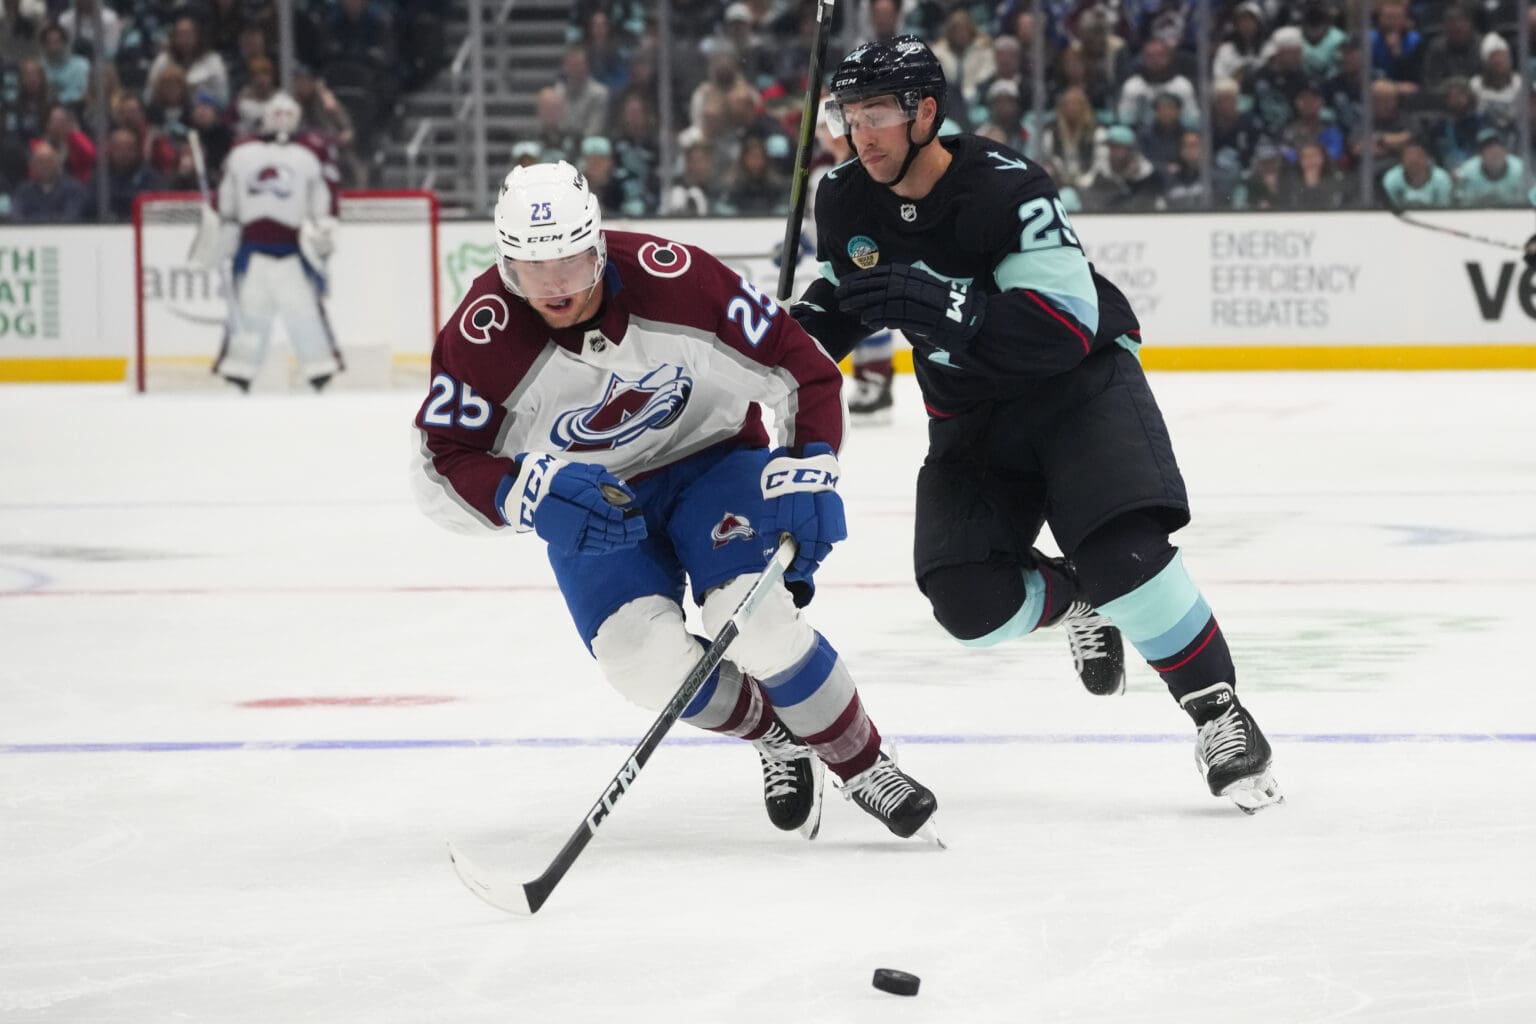 Colorado Avalanche right wing Logan O'Connor (25) breaks away from Seattle Kraken defenseman Vince Dunn (29) to chase after the ball as spectators and goalkeeper watch from afar.